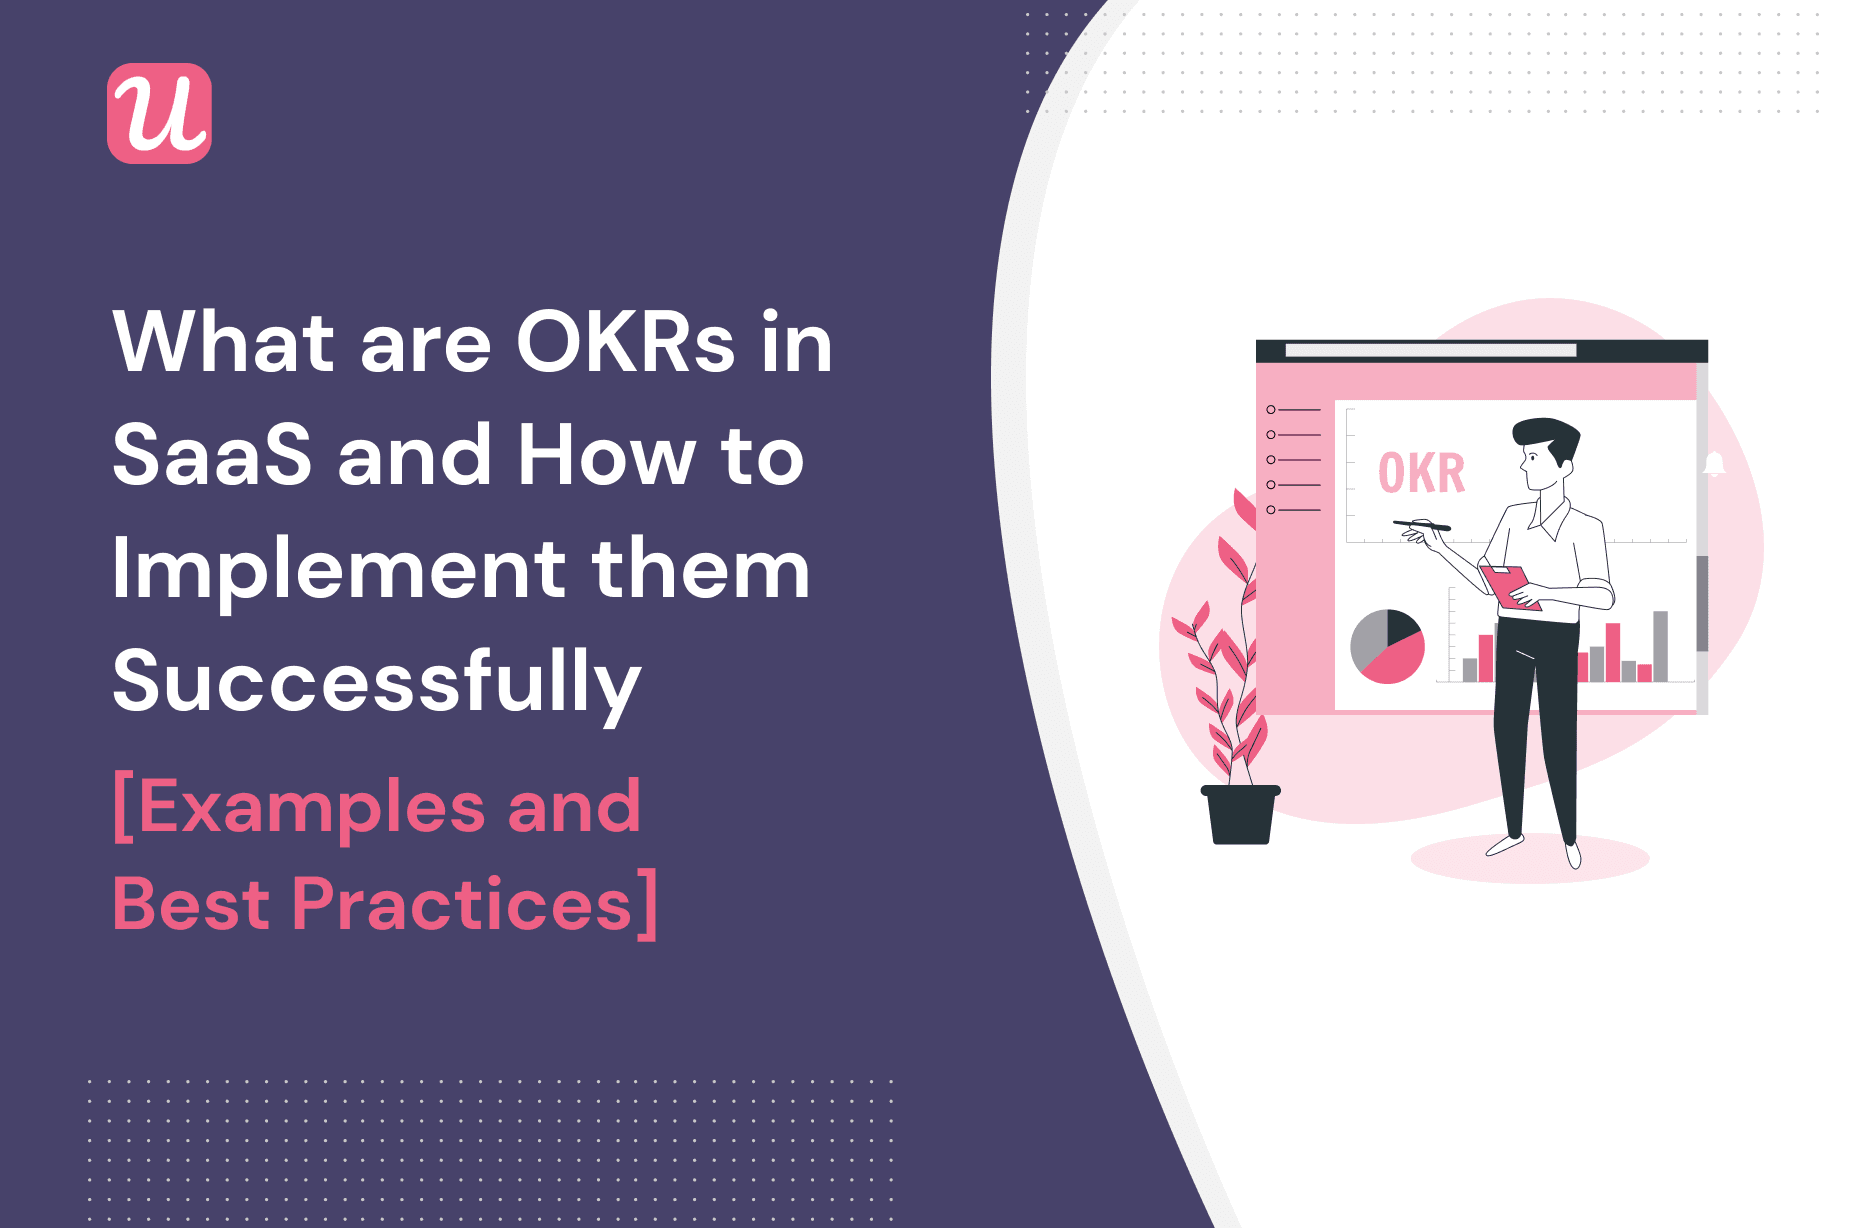 What Are OKRs In SaaS And How To Implement Them Successfully [Examples Included]